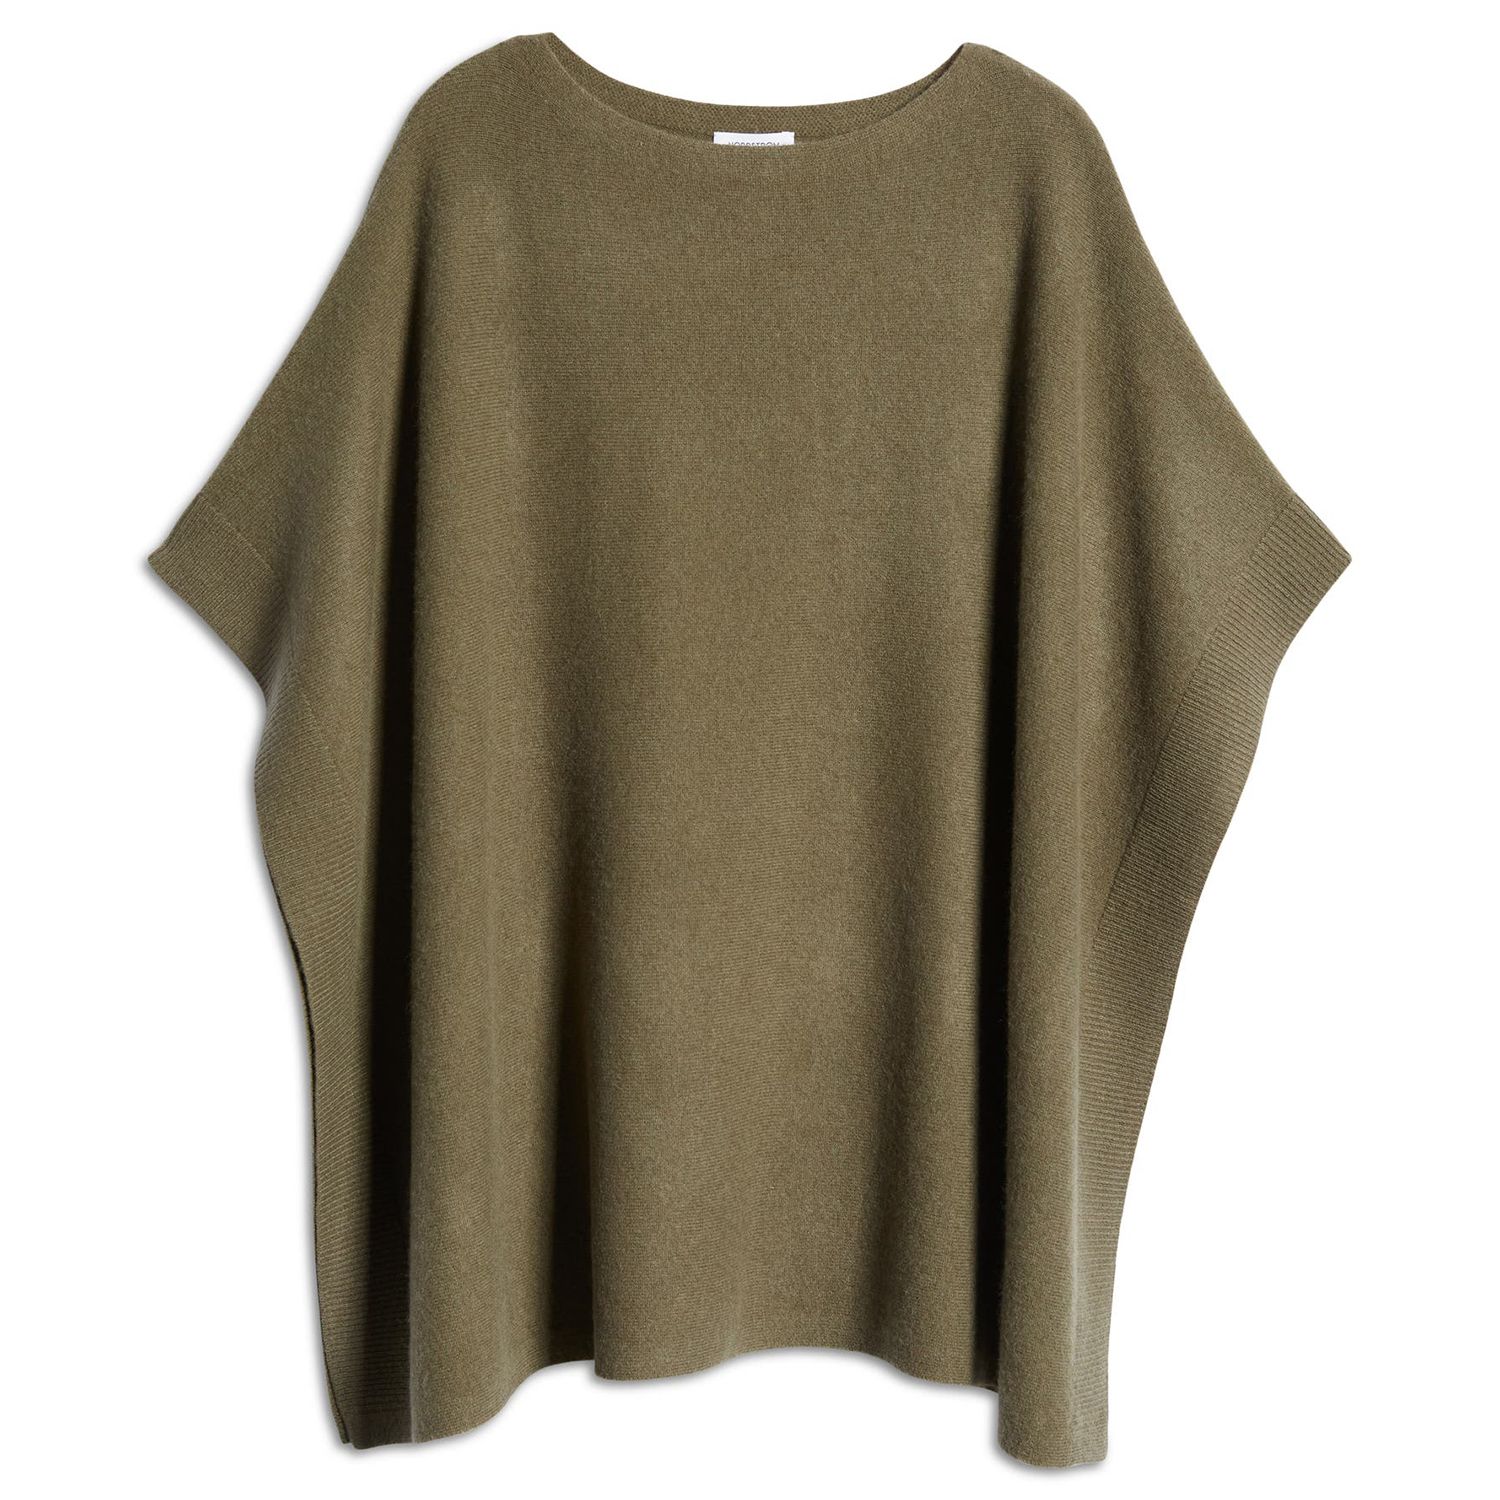 Discover ultimate relaxation with warm
and soft cashmere poncho!